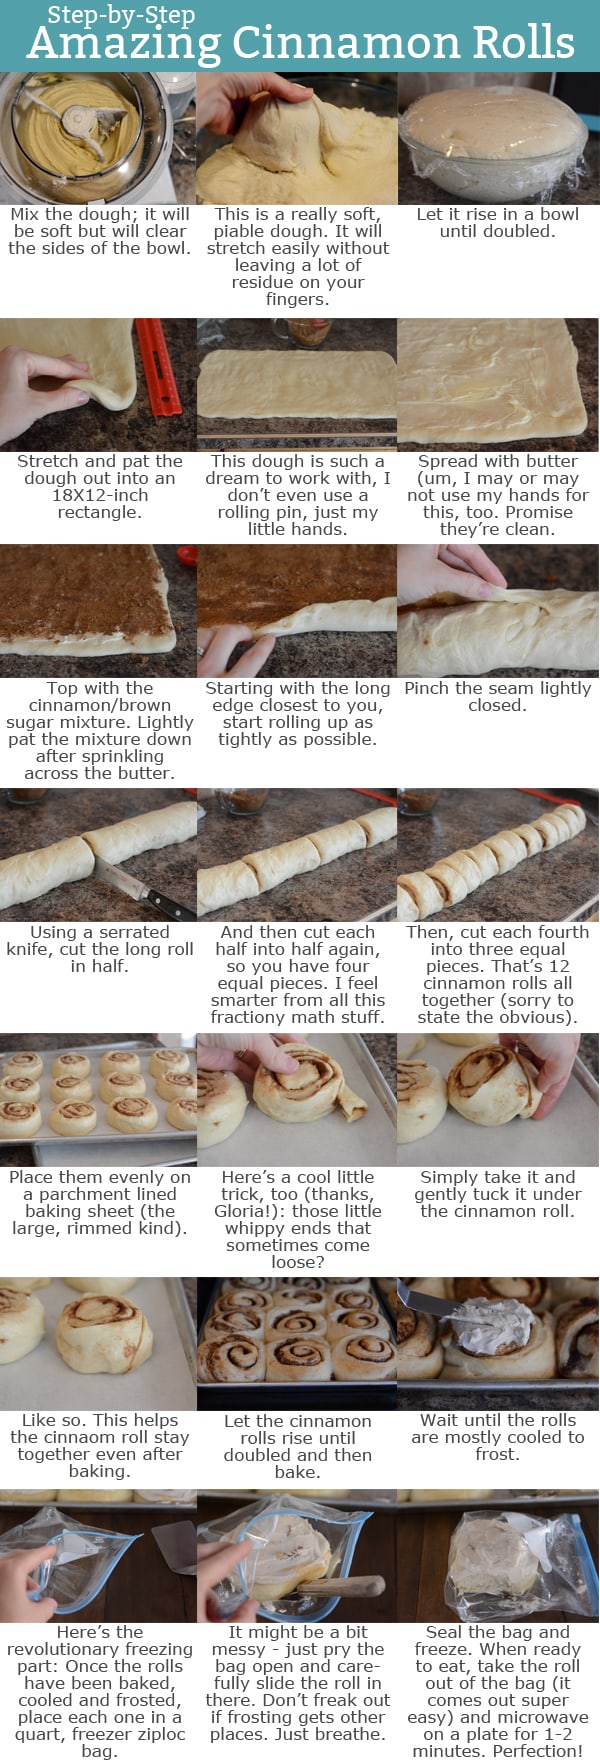 Step-by-step photos and instructions on how to make cinnamon rolls. 